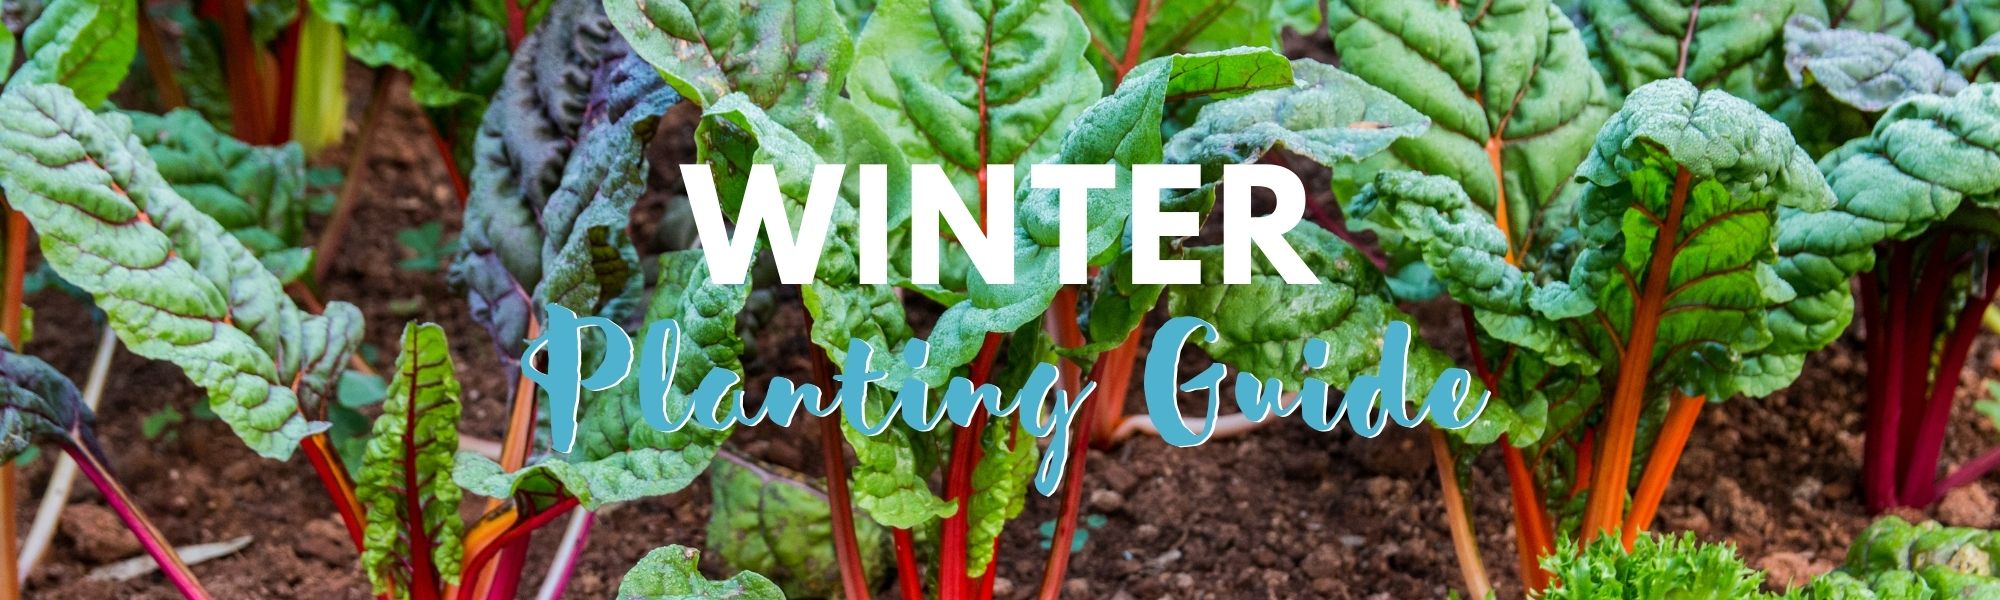 Winter Months Planting Guide